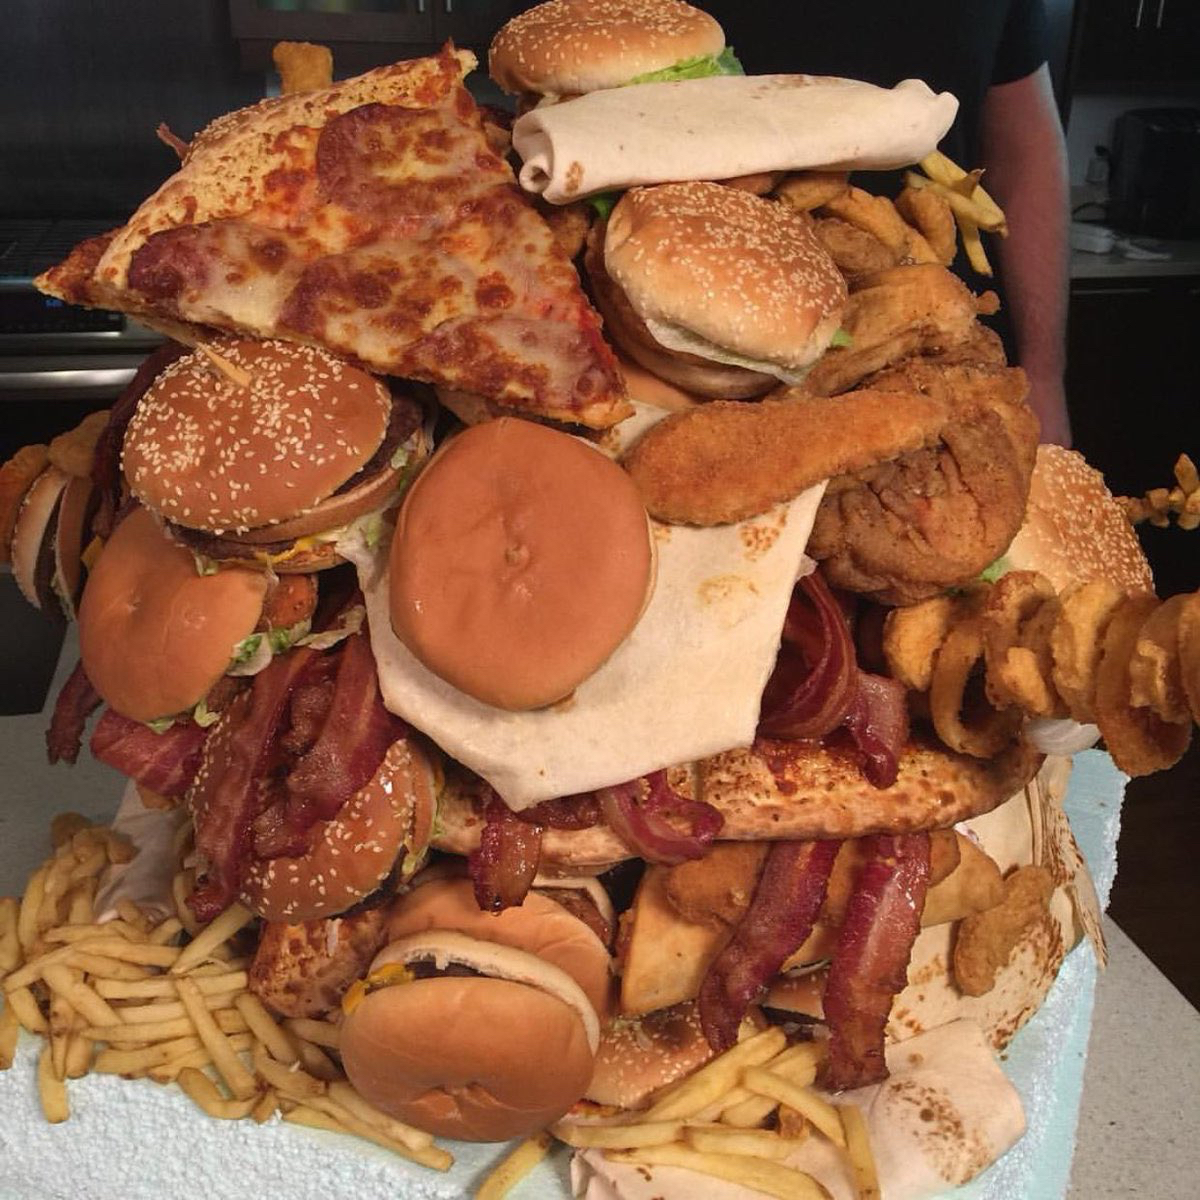 huge ball of fast food burgers pizza french fries fried chicken